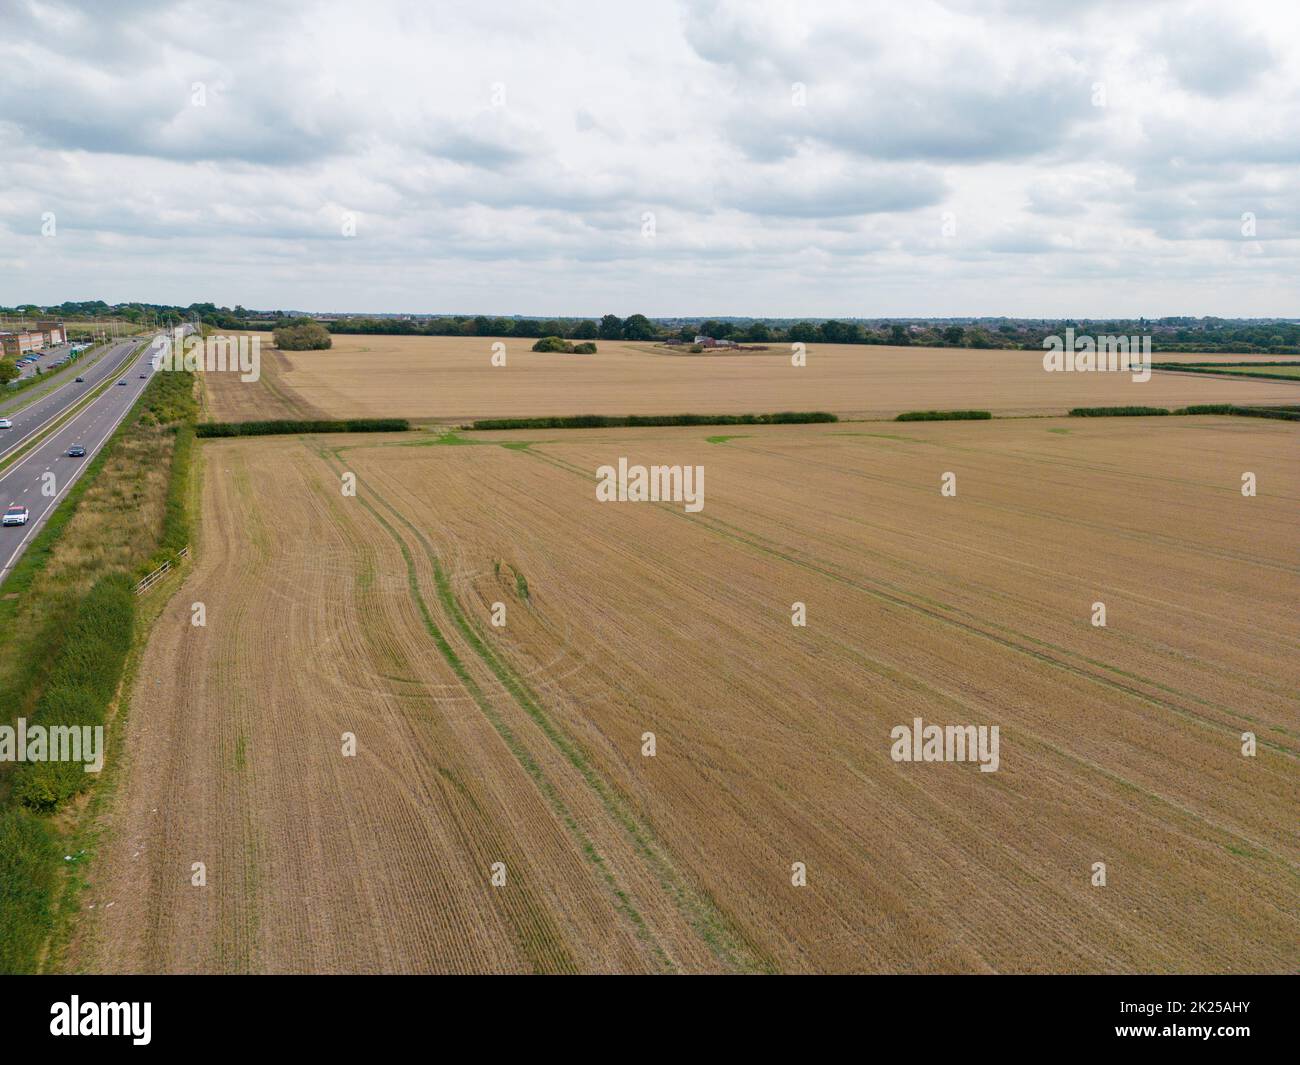 The greenfield site opposite Horiba that will be built on to extend the MIRA site creating over two thousand jobs. The A5 can be seen on the left and the image is takien looking towards Hinckley. IMAGE TAKEN ON PUBLIC HIGHWAY NOT ON ANY PRIVATE PROPERTY. Stock Photo